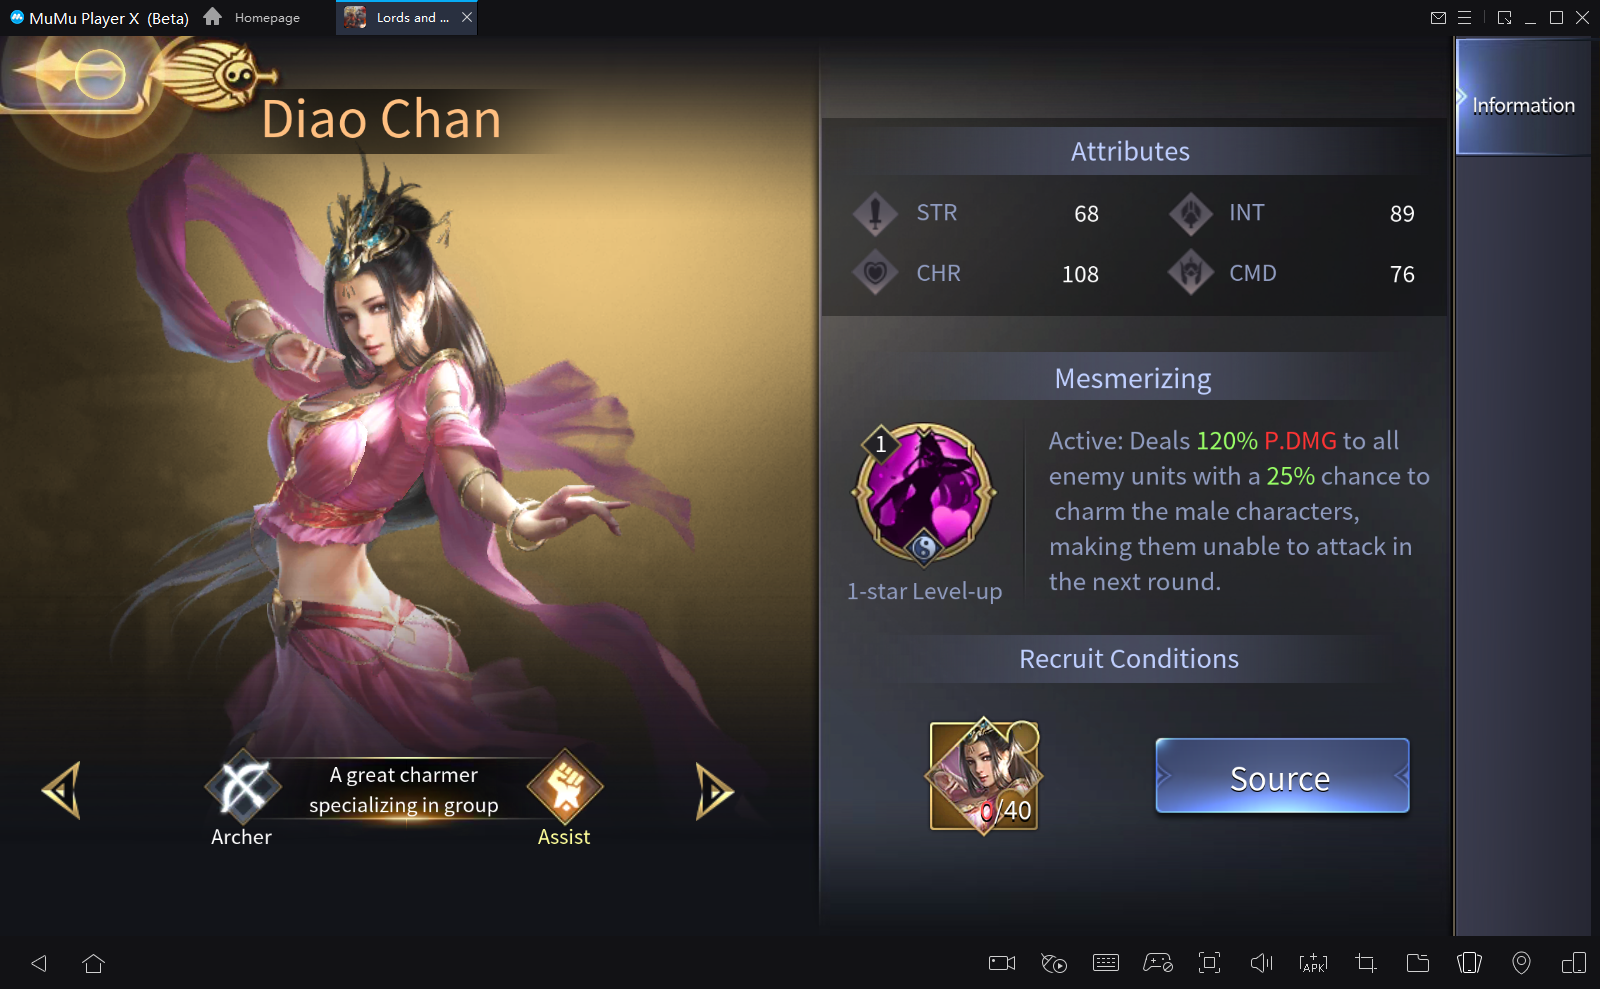  Lords and Tactics Diaochan